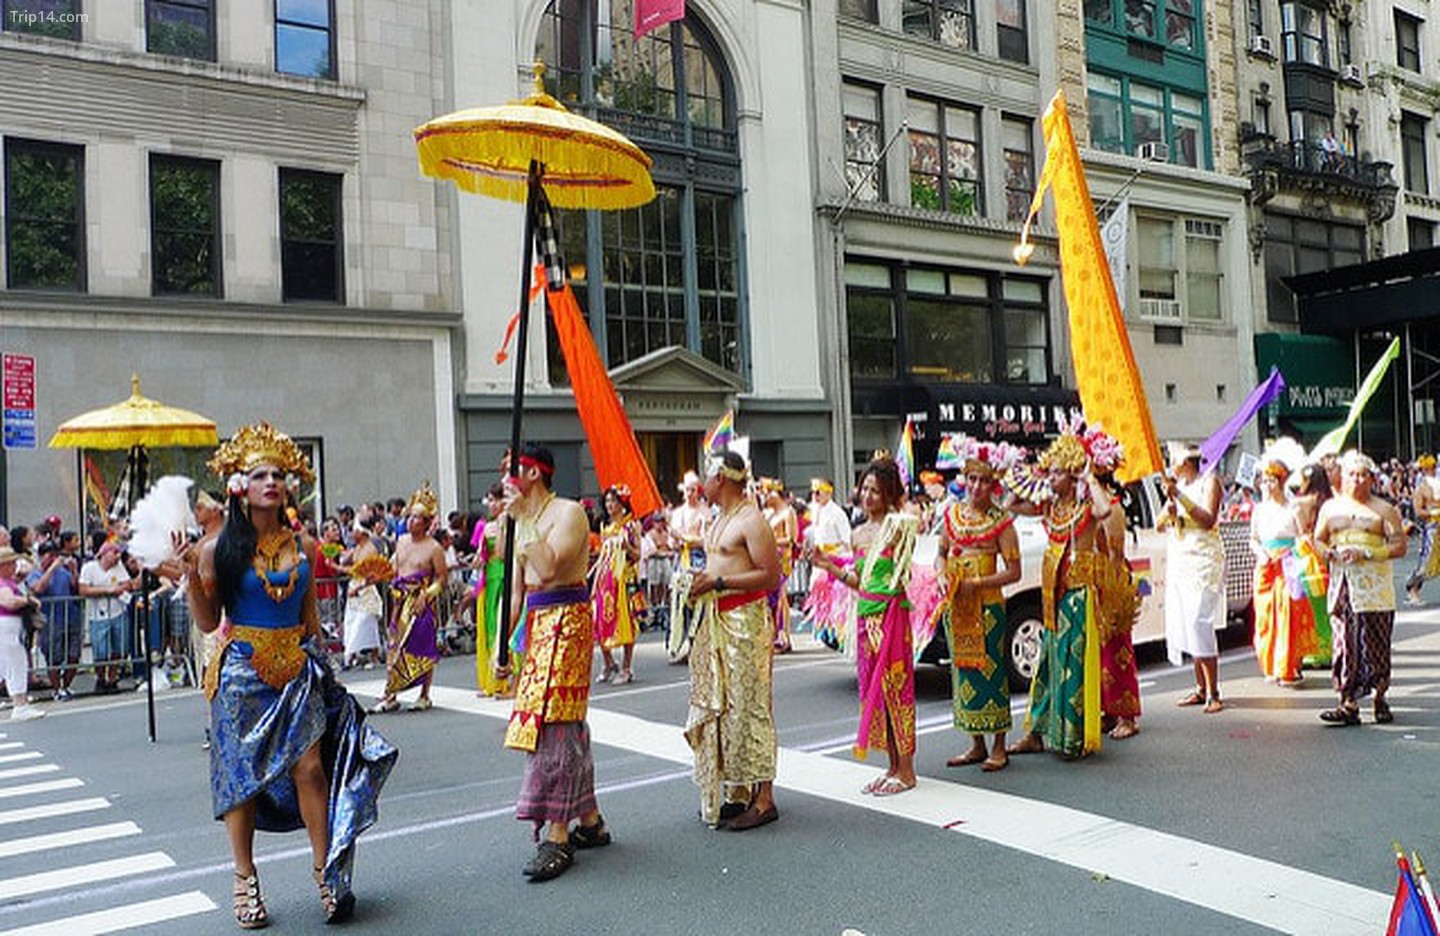  LGBT Indonesia tại NYC Pride March   |   @Lucius Kwok / Flickr 